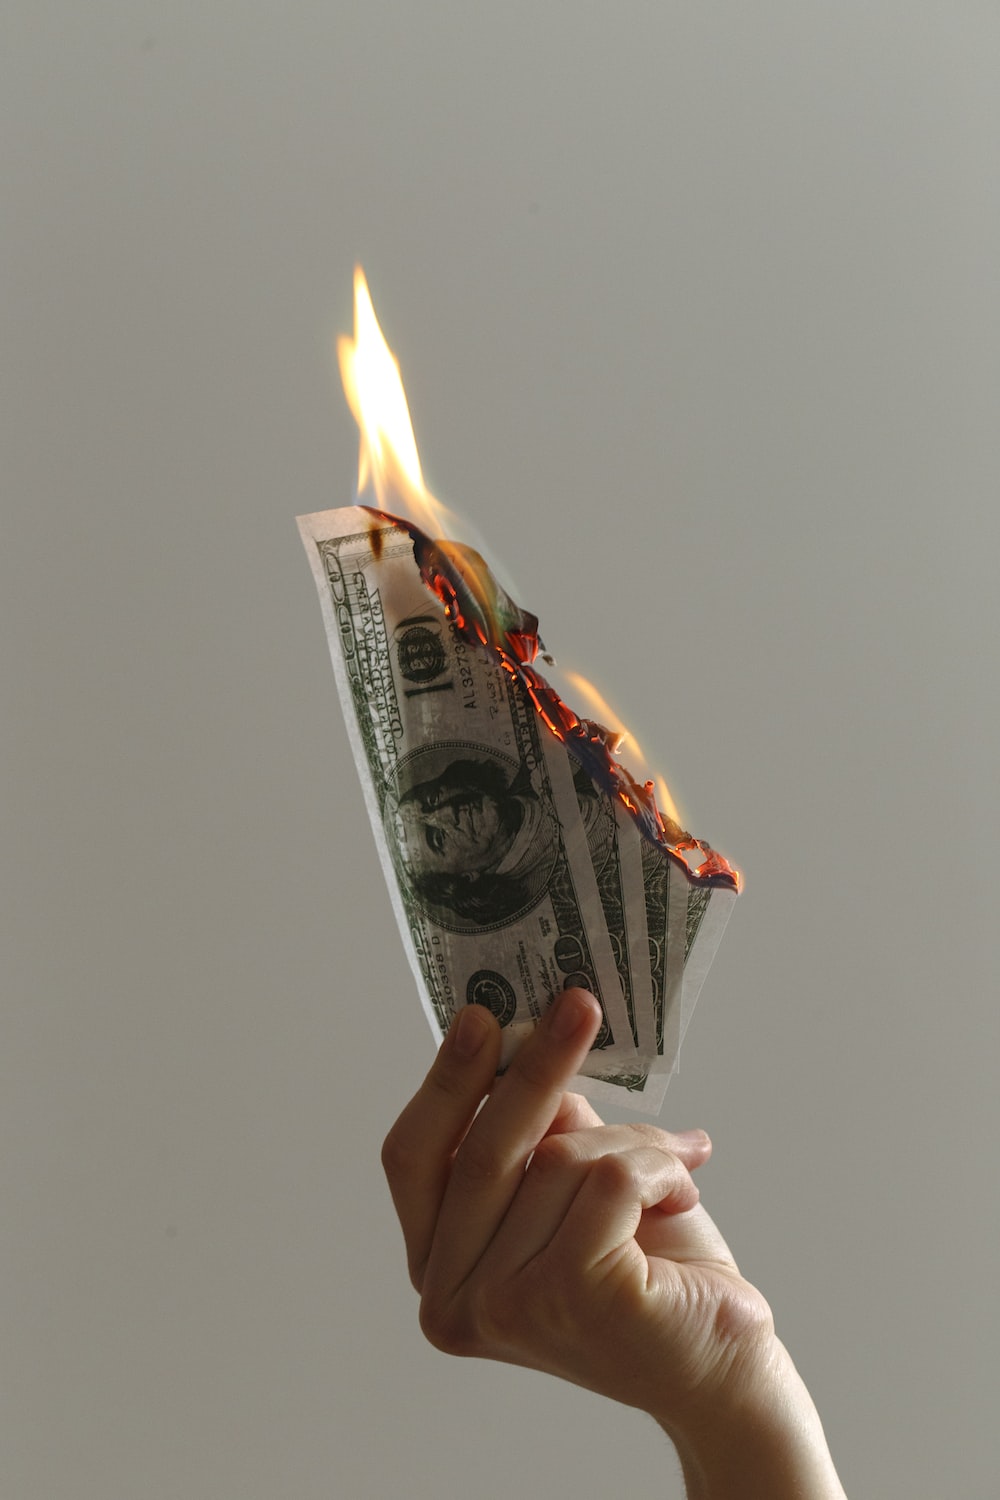 Money Burn Picture. Download Free Image